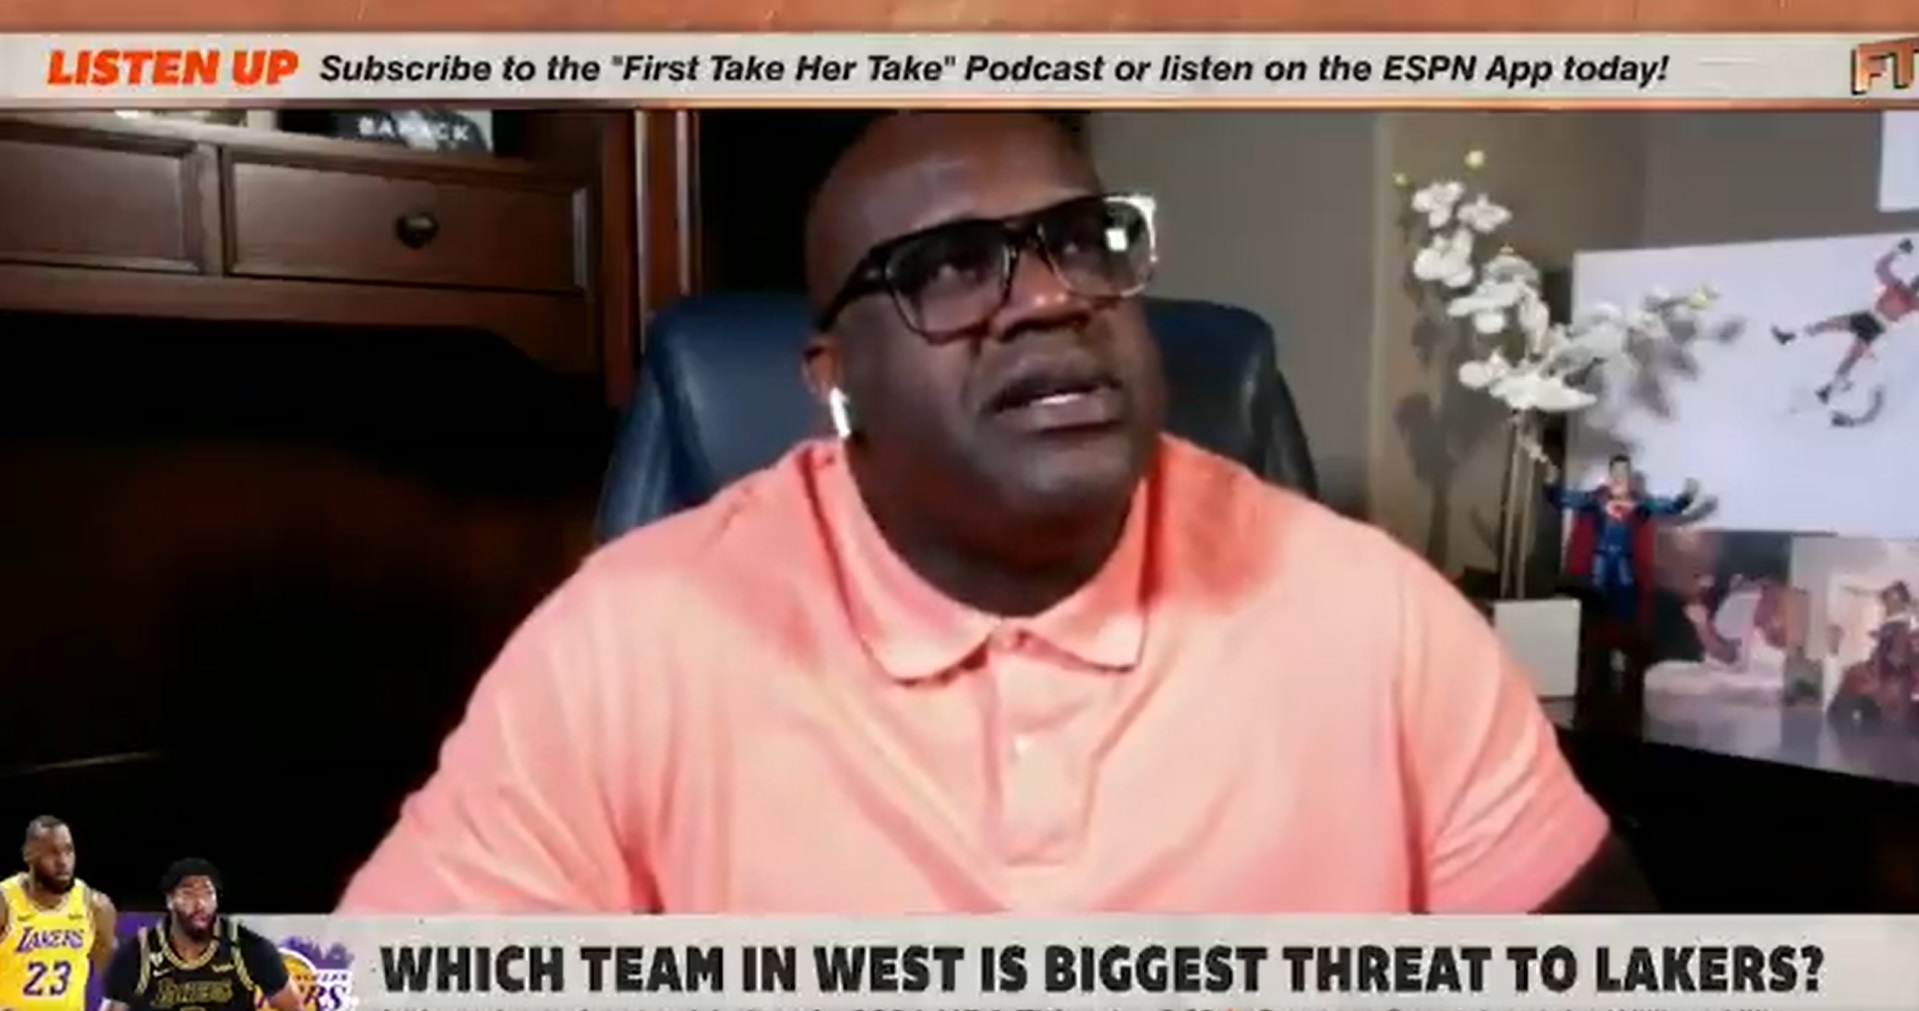 PHOTO Shaq On First Take Wearing The Ugliest Glasses He Has In His Collection